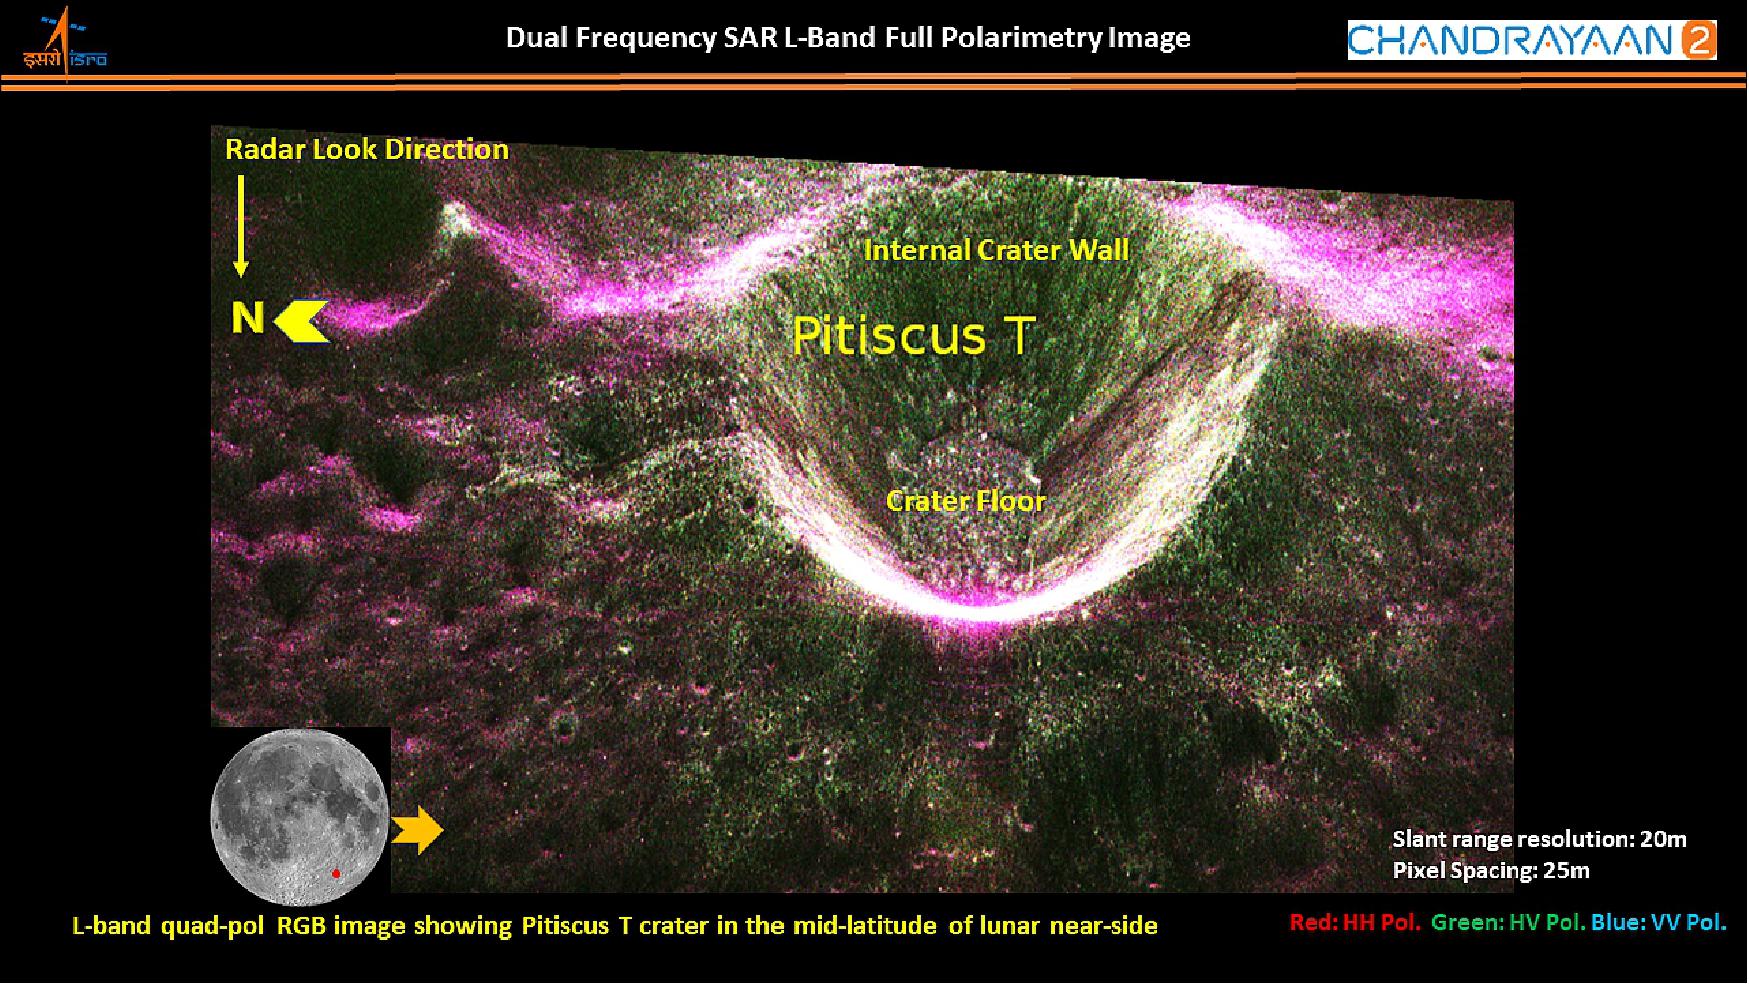 Figure 16: Chandrayaan-2 Orbiter’s DF-SAR has been operated in full-polarimetry mode- a gold standard in SAR polarimetry, and is the first-ever by any planetary SAR instrument. This Figure shows an L-band fully-polarimetric, 20 m slant-range resolution image of the Pitiscus-T crater. The image is a color composite of different transmit-receive polarization responses of the imaged region (image credit: ISRO)